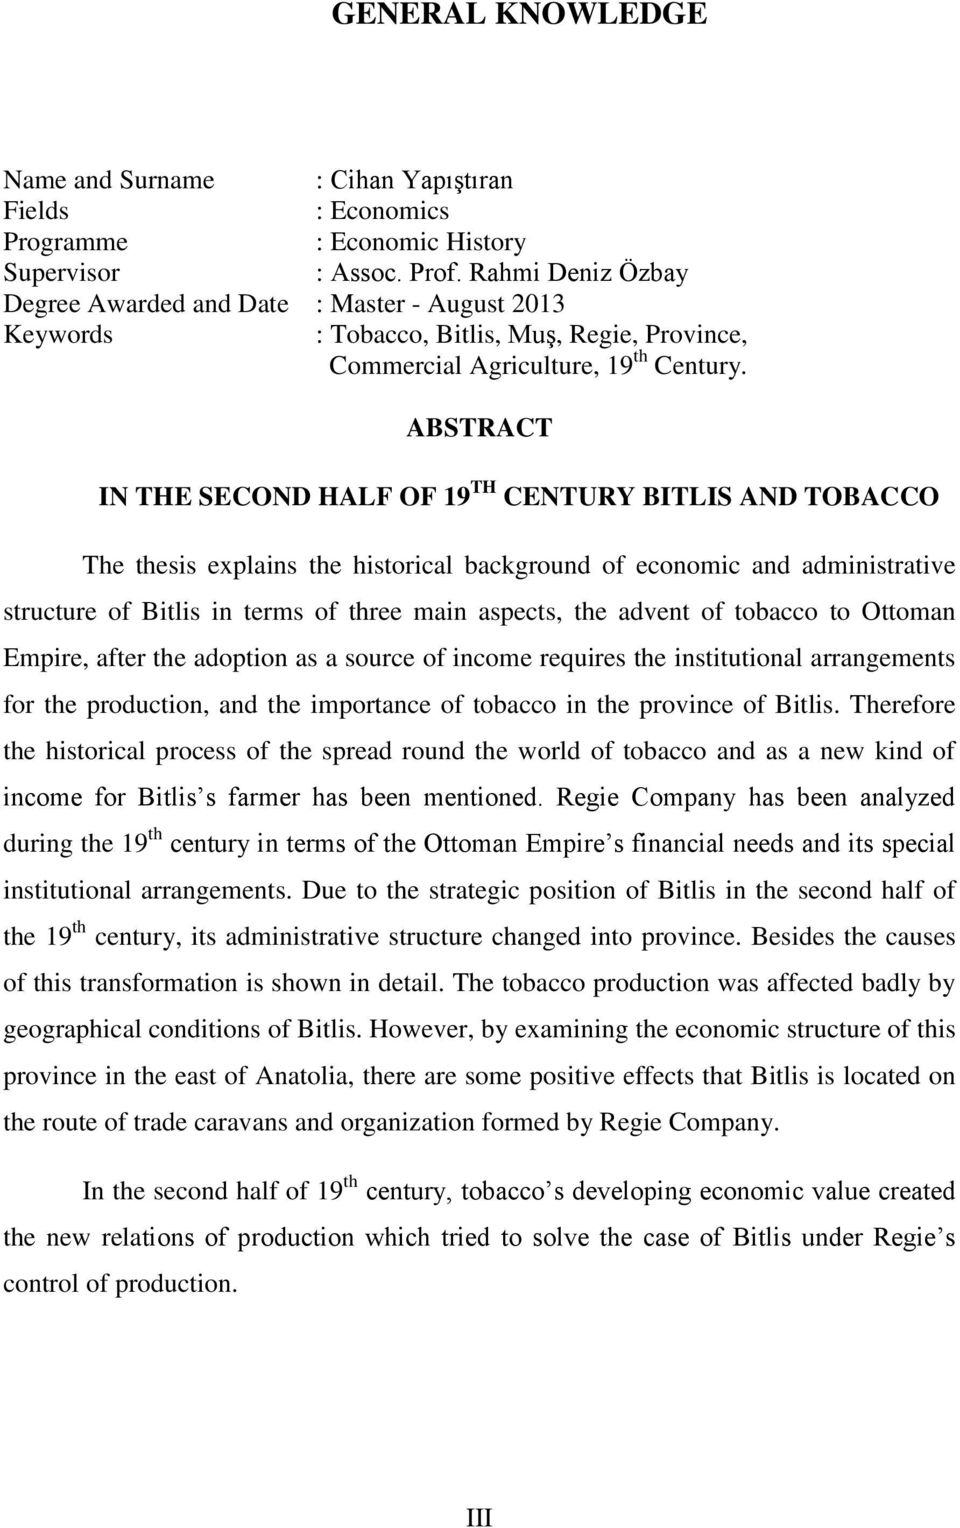 ABSTRACT IN THE SECOND HALF OF 19 TH CENTURY BITLIS AND TOBACCO The thesis explains the historical background of economic and administrative structure of Bitlis in terms of three main aspects, the